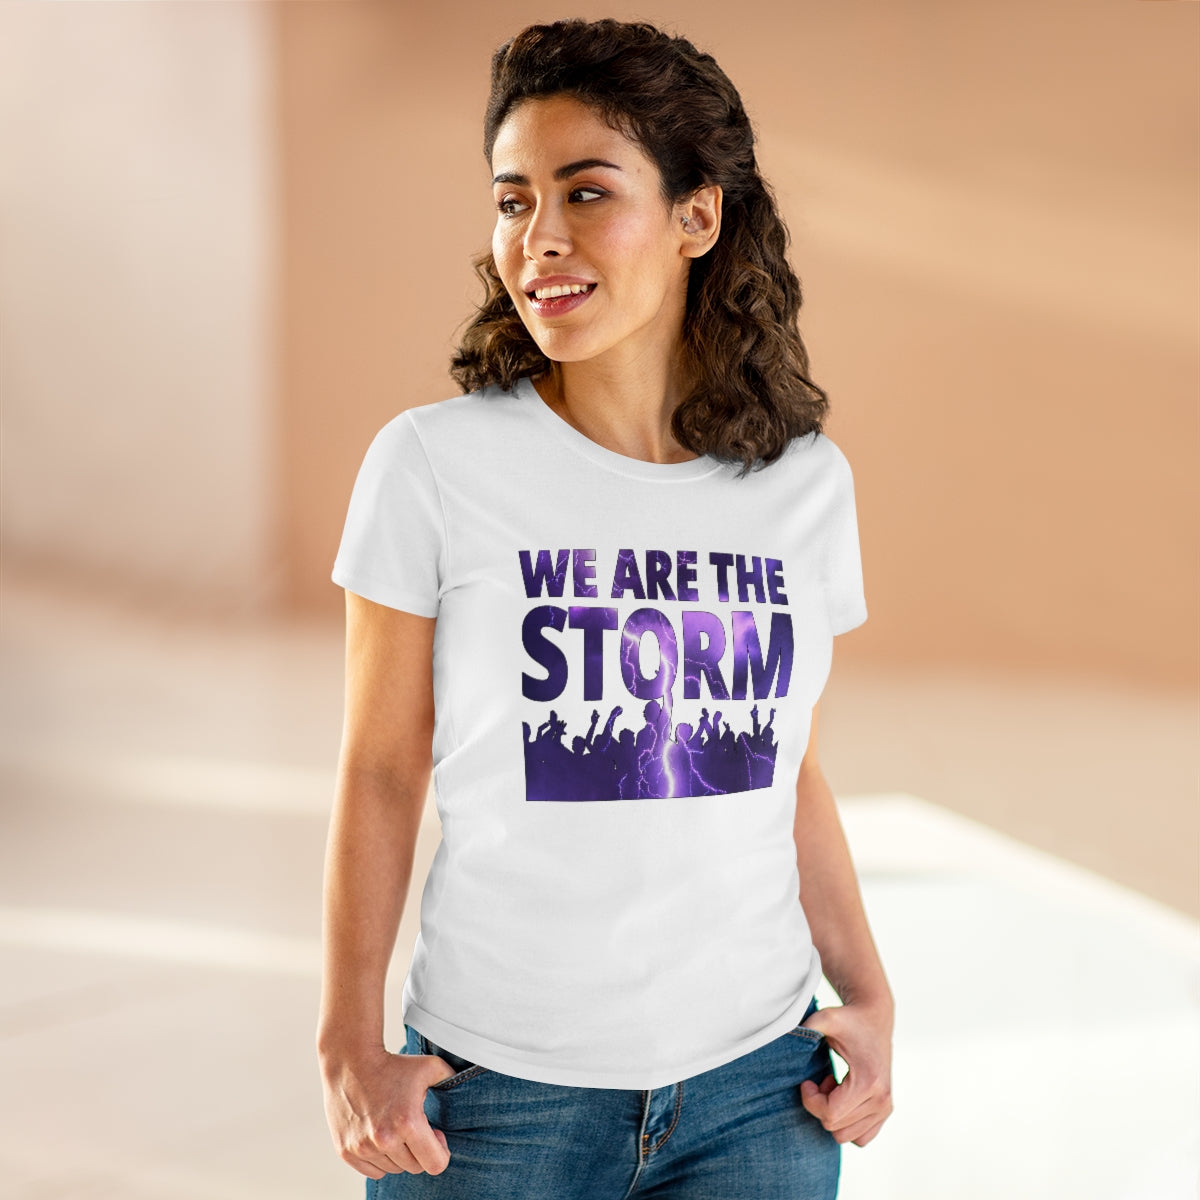 We Are The Storm | Women's Tee - Rise of The New Media